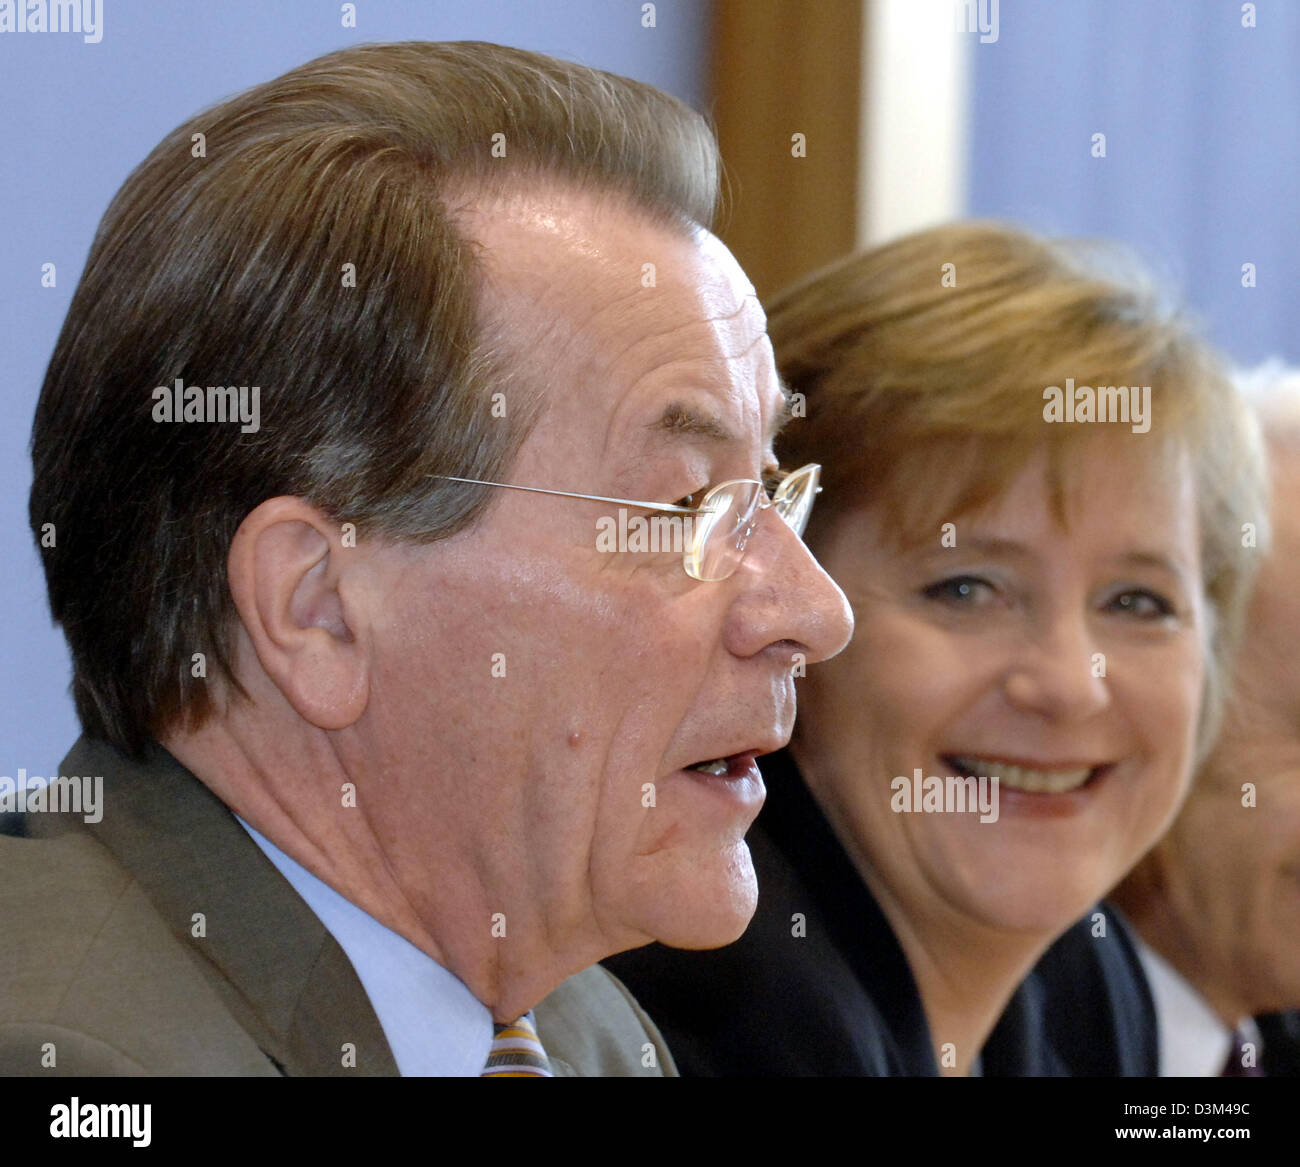 (dpa) - Angela Merkel, Chairwoman of the conservative Christian Democratic Union (CDU) and designated German Chancellor, looks at Franz Muentefering, outgoing Chairman of the Social Democrats (SPD) and designated Vice Chancellor, during a press conference concerning the coalition agreement in Berlin, Germany, 12 November 2005. The coalition agreement between parties which was discu Stock Photo